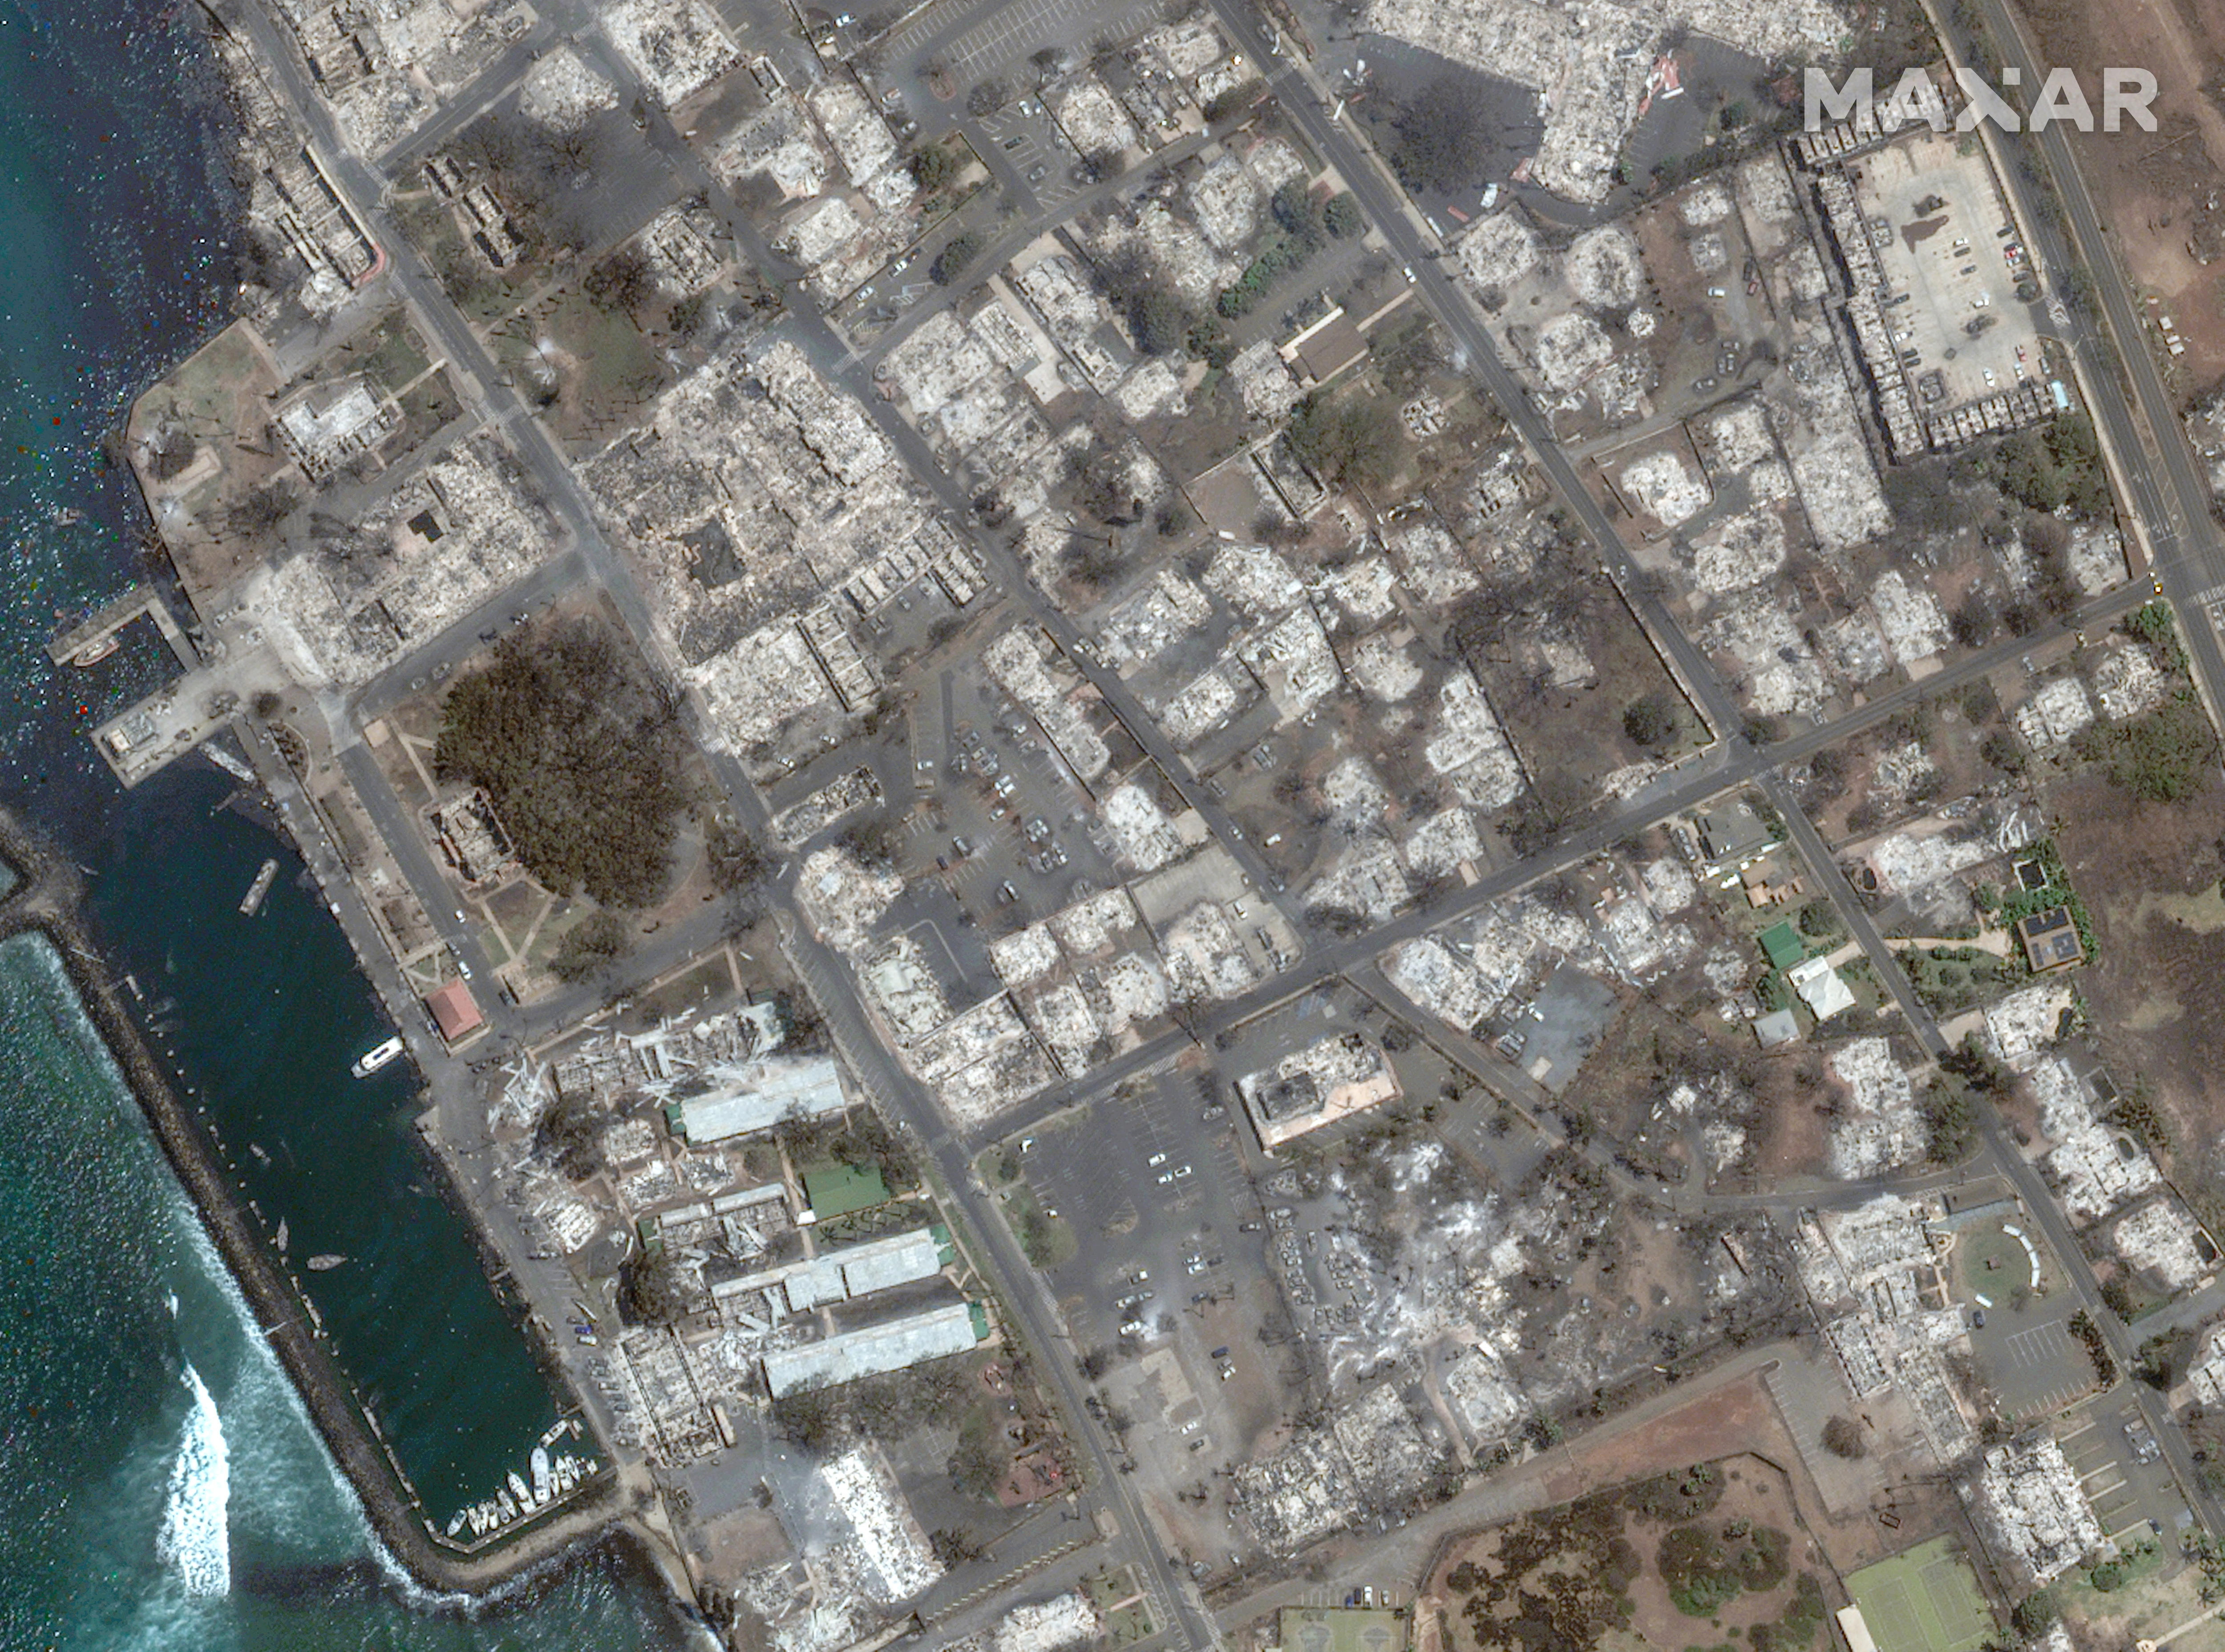 Auguest 9: The same area following a wildfire that tore through the area. (Maxar Technologies)